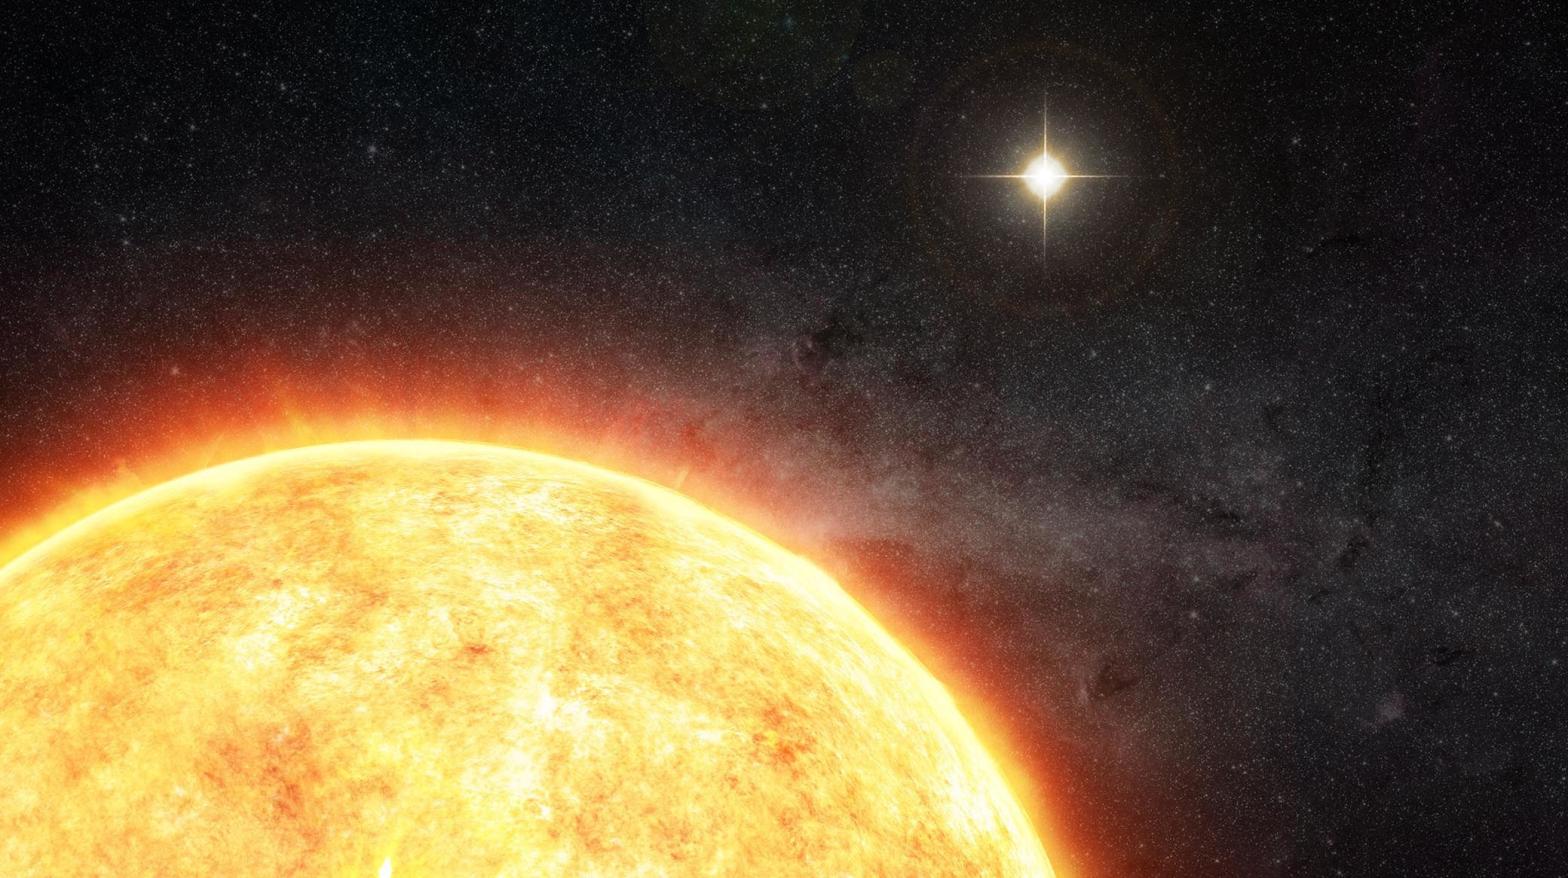 Artist's depiction of our Sun, along with its hypothesised solar companion. (Image: M. Weiss)